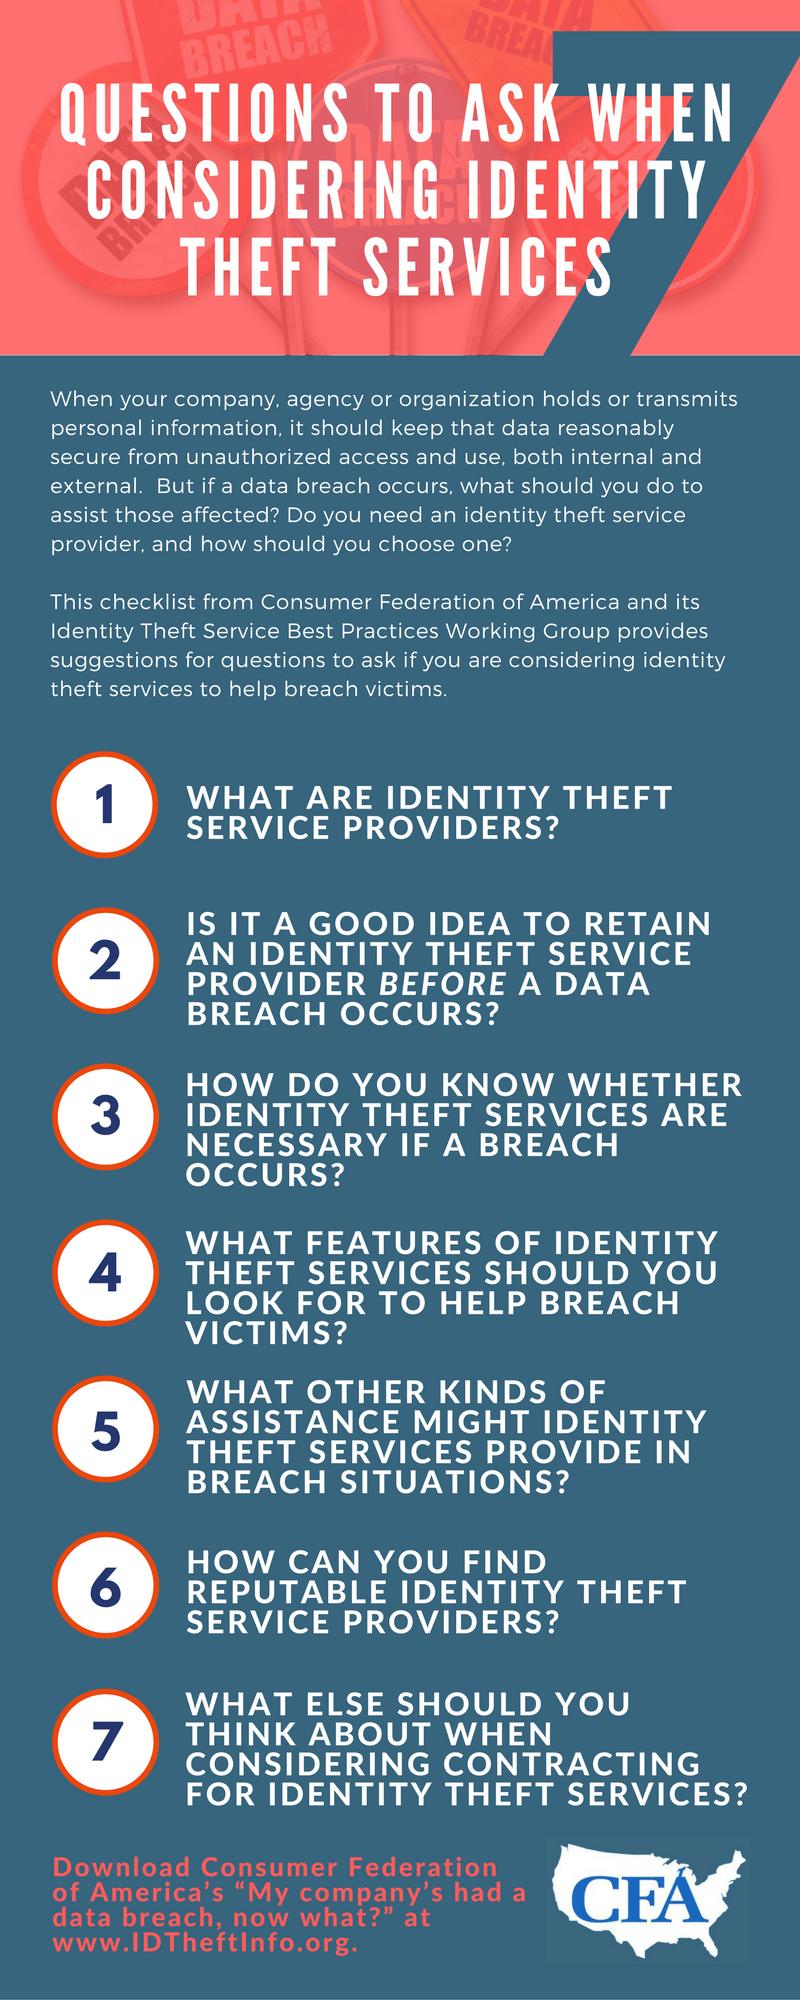 7 Questions to ask when considering identity theft services (3)